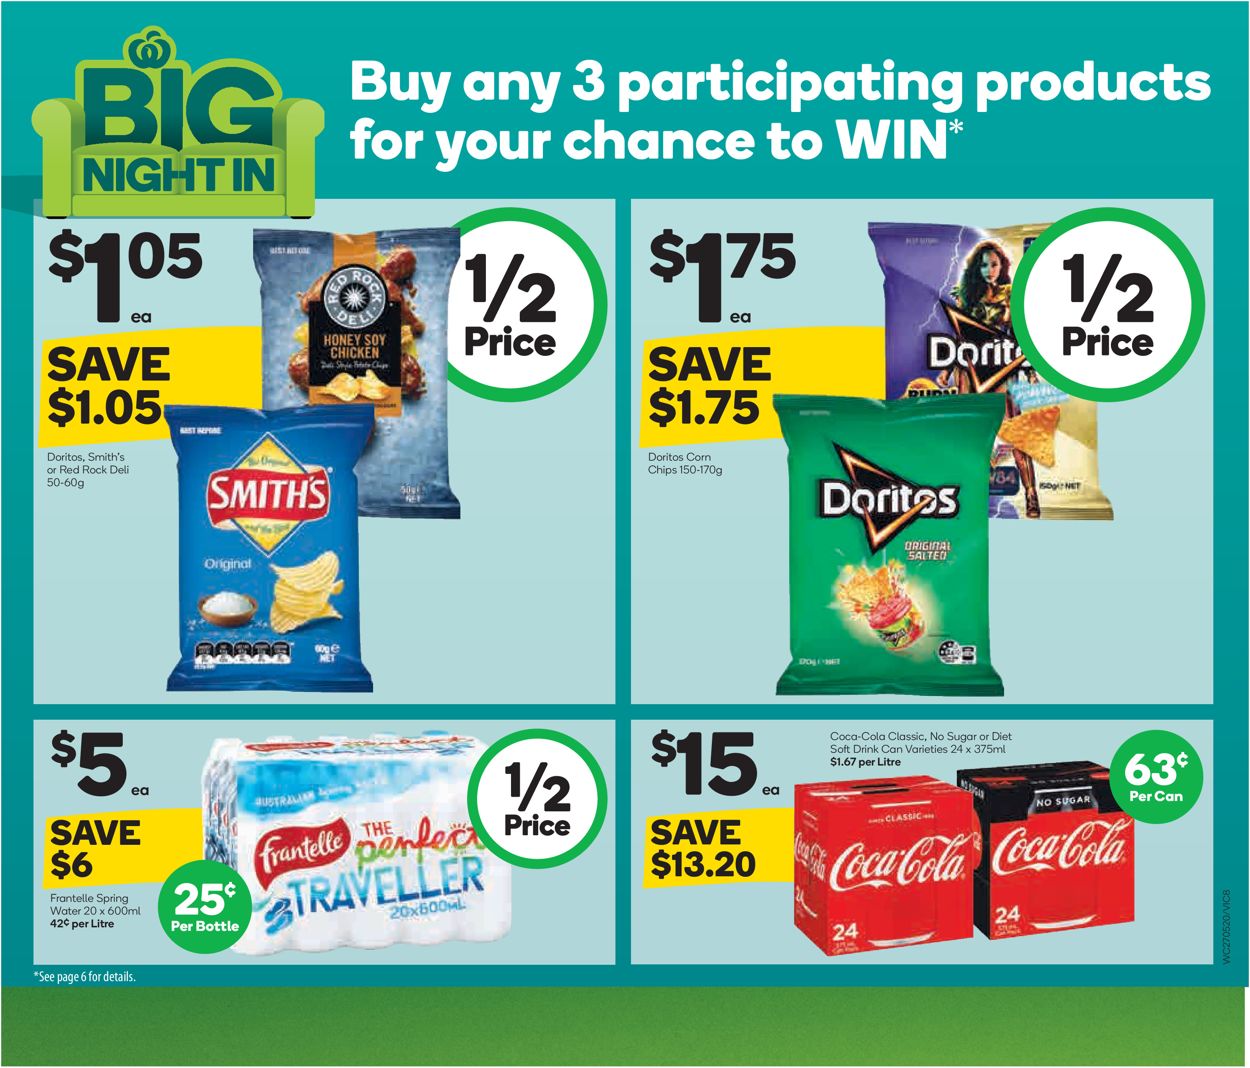 Woolworths Catalogue - 27/05-02/06/2020 (Page 8)